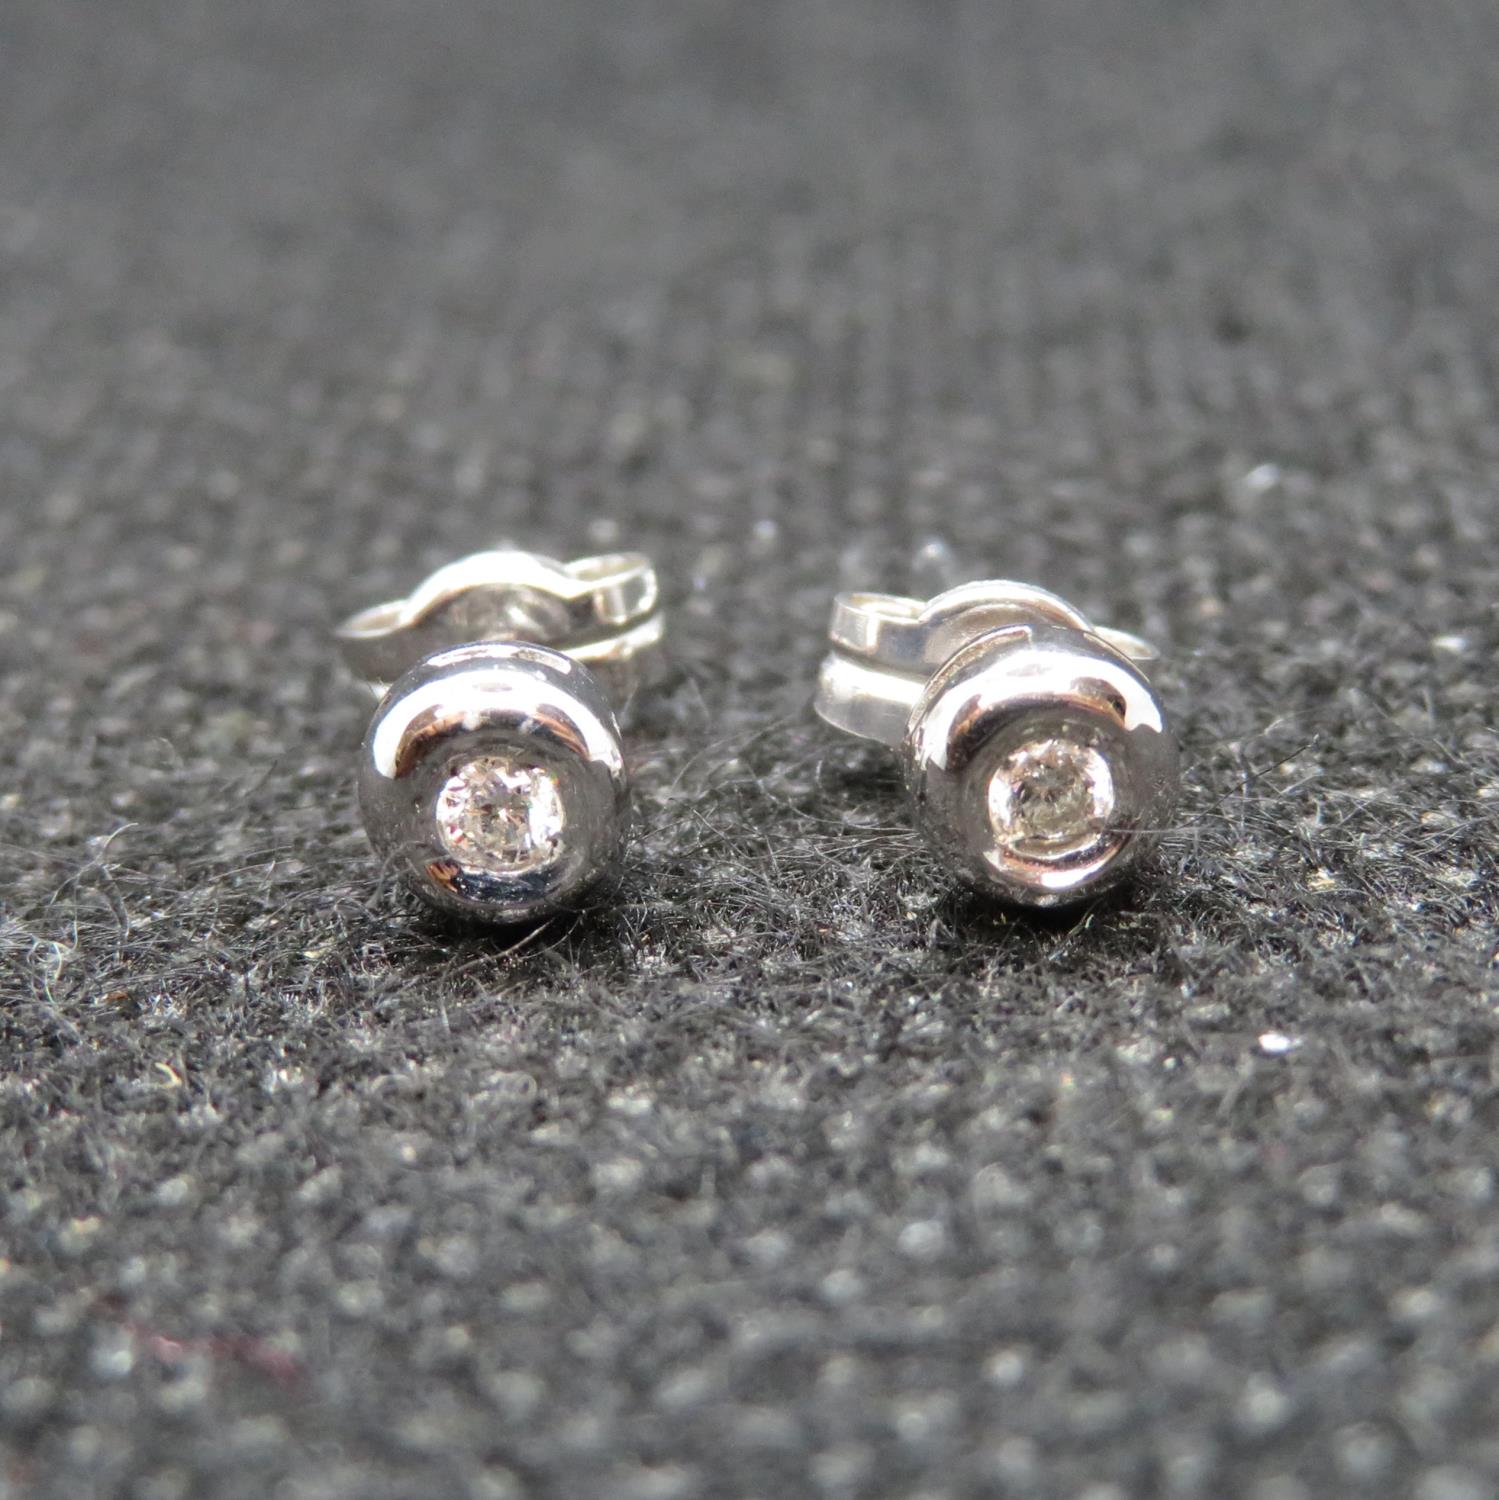 Nice pair of 9ct white gold and diamond earrings